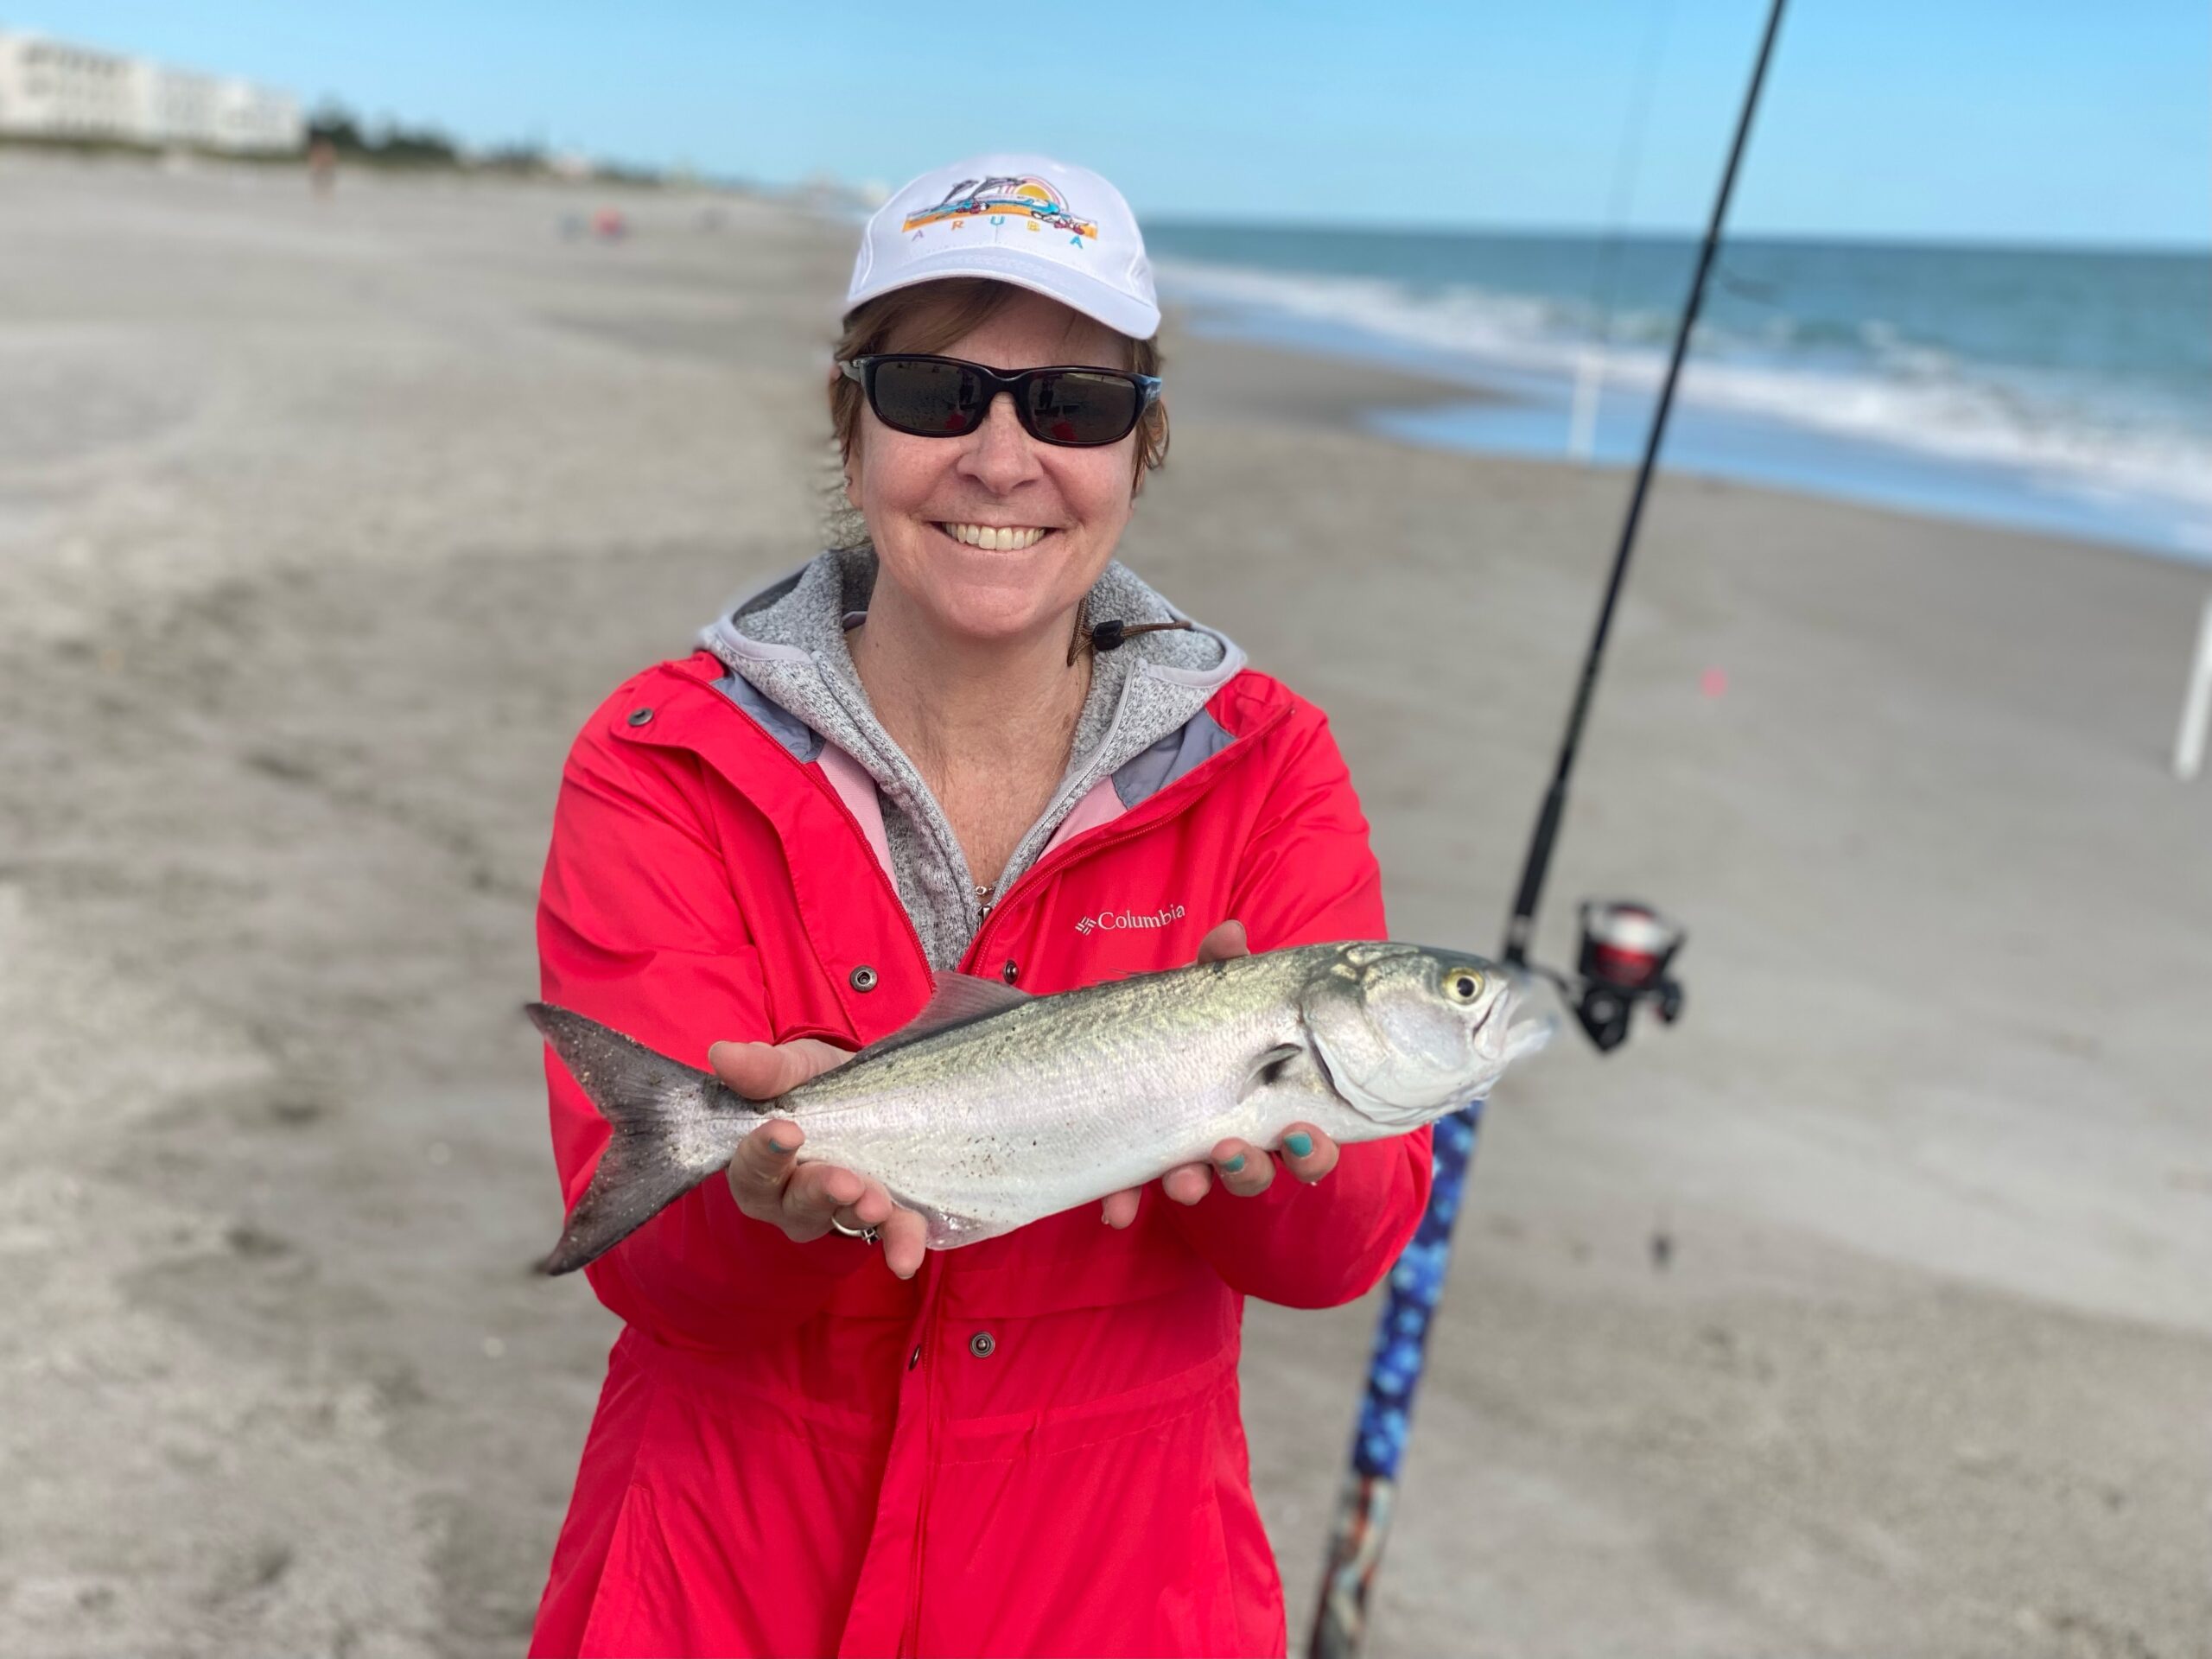 Surf Fishing In Winter For Pompano, Whiting, & Bluefish